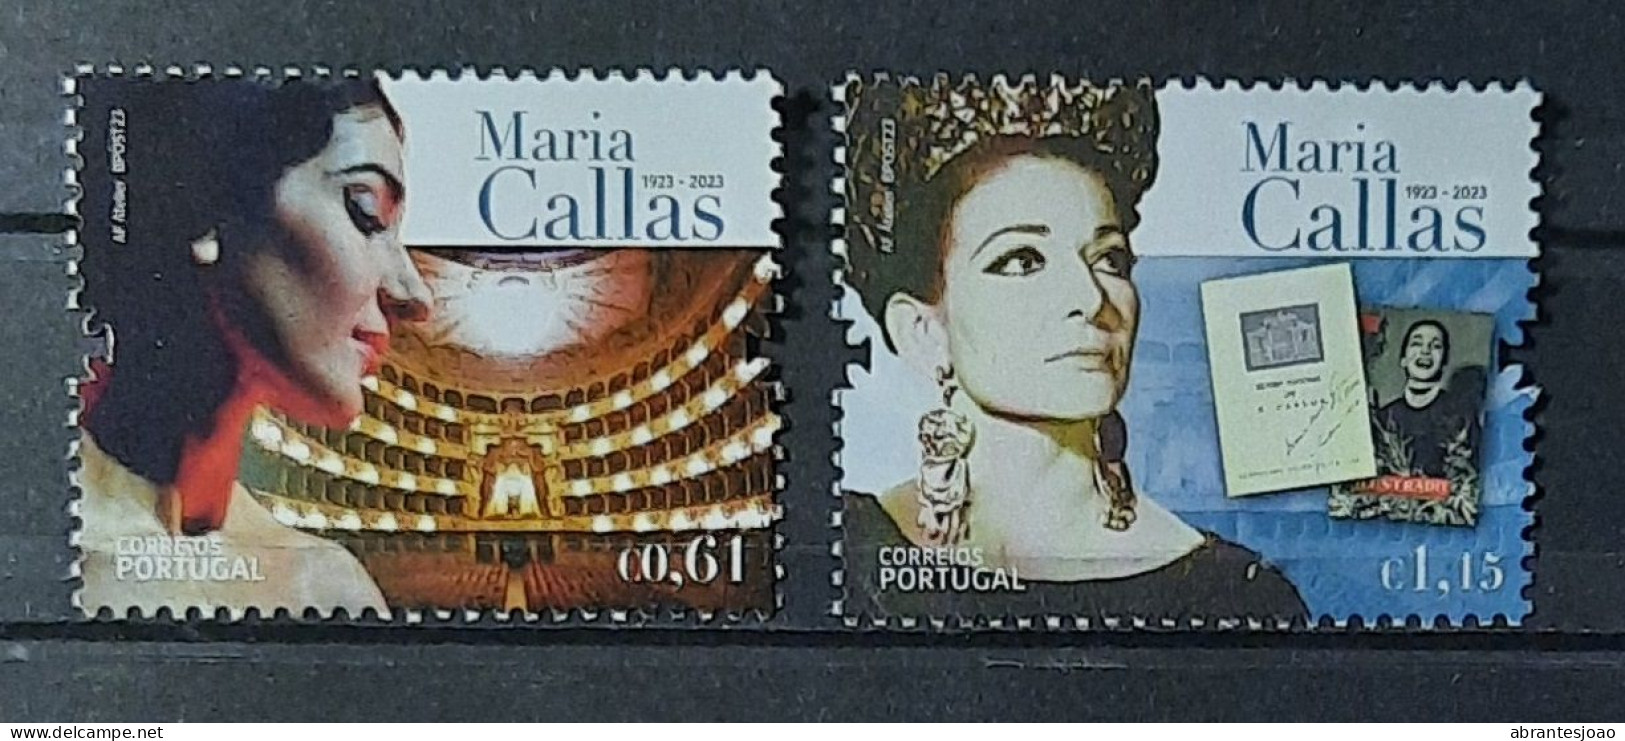 2023 - Portugal - MNH - Centenary Of Maria Callas - Opera Diva - 2 Stamps - Unused Stamps